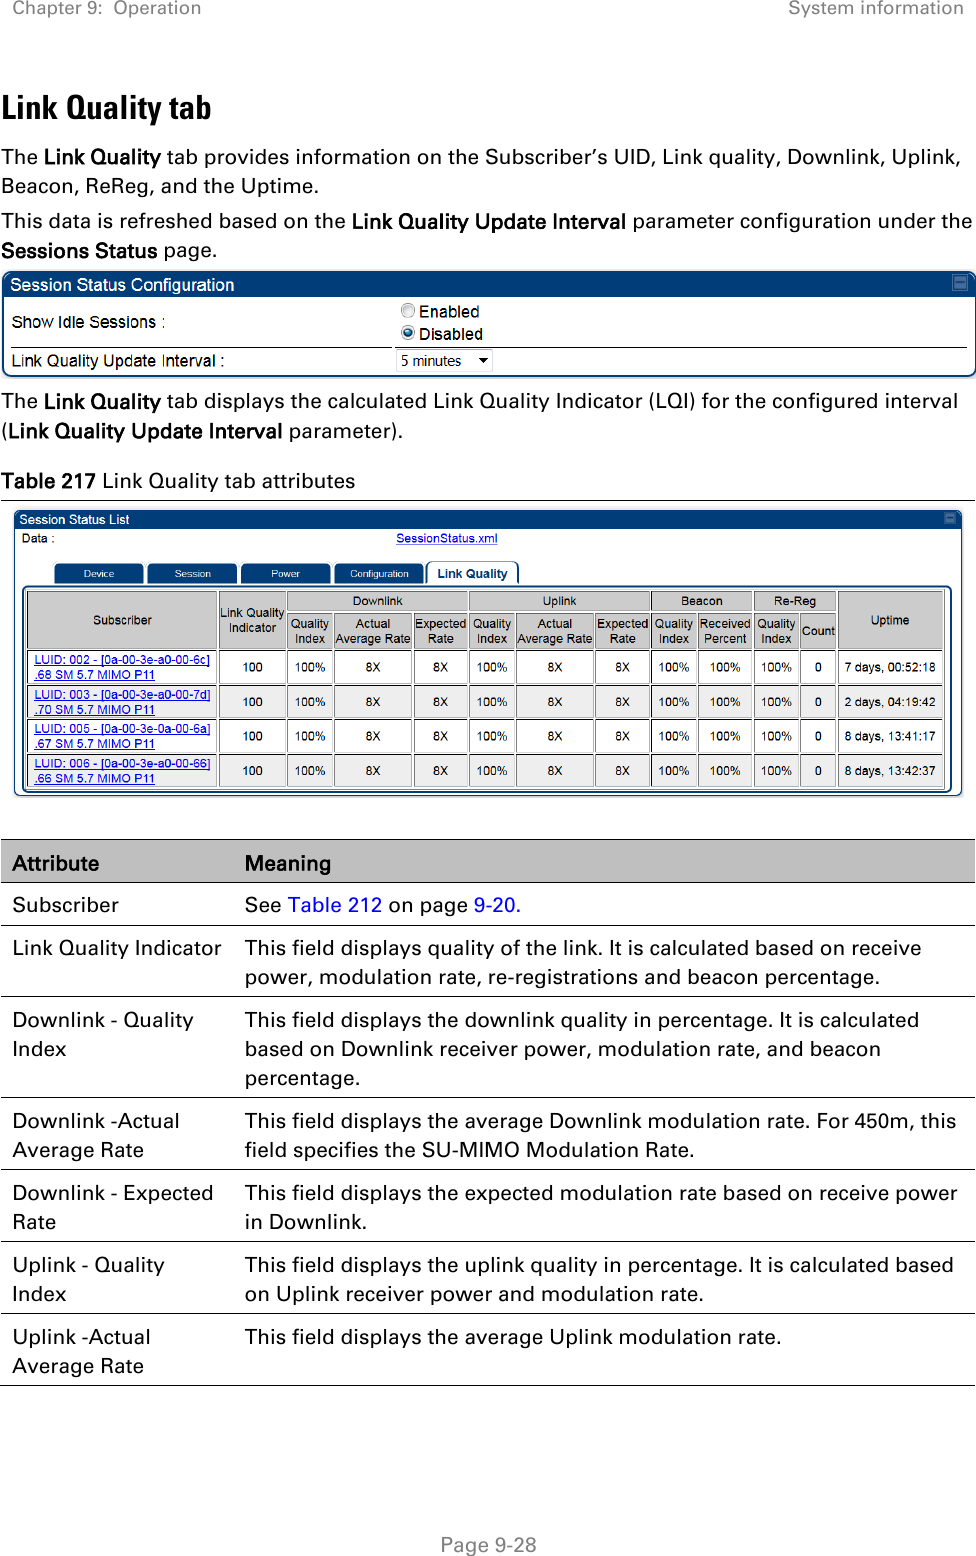 Chapter 9:  Operation System information   Page 9-28 Link Quality tab The Link Quality tab provides information on the Subscriber’s UID, Link quality, Downlink, Uplink, Beacon, ReReg, and the Uptime. This data is refreshed based on the Link Quality Update Interval parameter configuration under the Sessions Status page.   The Link Quality tab displays the calculated Link Quality Indicator (LQI) for the configured interval (Link Quality Update Interval parameter). Table 217 Link Quality tab attributes   Attribute Meaning Subscriber  See Table 212 on page 9-20. Link Quality Indicator This field displays quality of the link. It is calculated based on receive power, modulation rate, re-registrations and beacon percentage. Downlink - Quality Index This field displays the downlink quality in percentage. It is calculated based on Downlink receiver power, modulation rate, and beacon percentage. Downlink -Actual Average Rate This field displays the average Downlink modulation rate. For 450m, this field specifies the SU-MIMO Modulation Rate. Downlink - Expected Rate This field displays the expected modulation rate based on receive power in Downlink. Uplink - Quality Index This field displays the uplink quality in percentage. It is calculated based on Uplink receiver power and modulation rate. Uplink -Actual Average Rate This field displays the average Uplink modulation rate. 